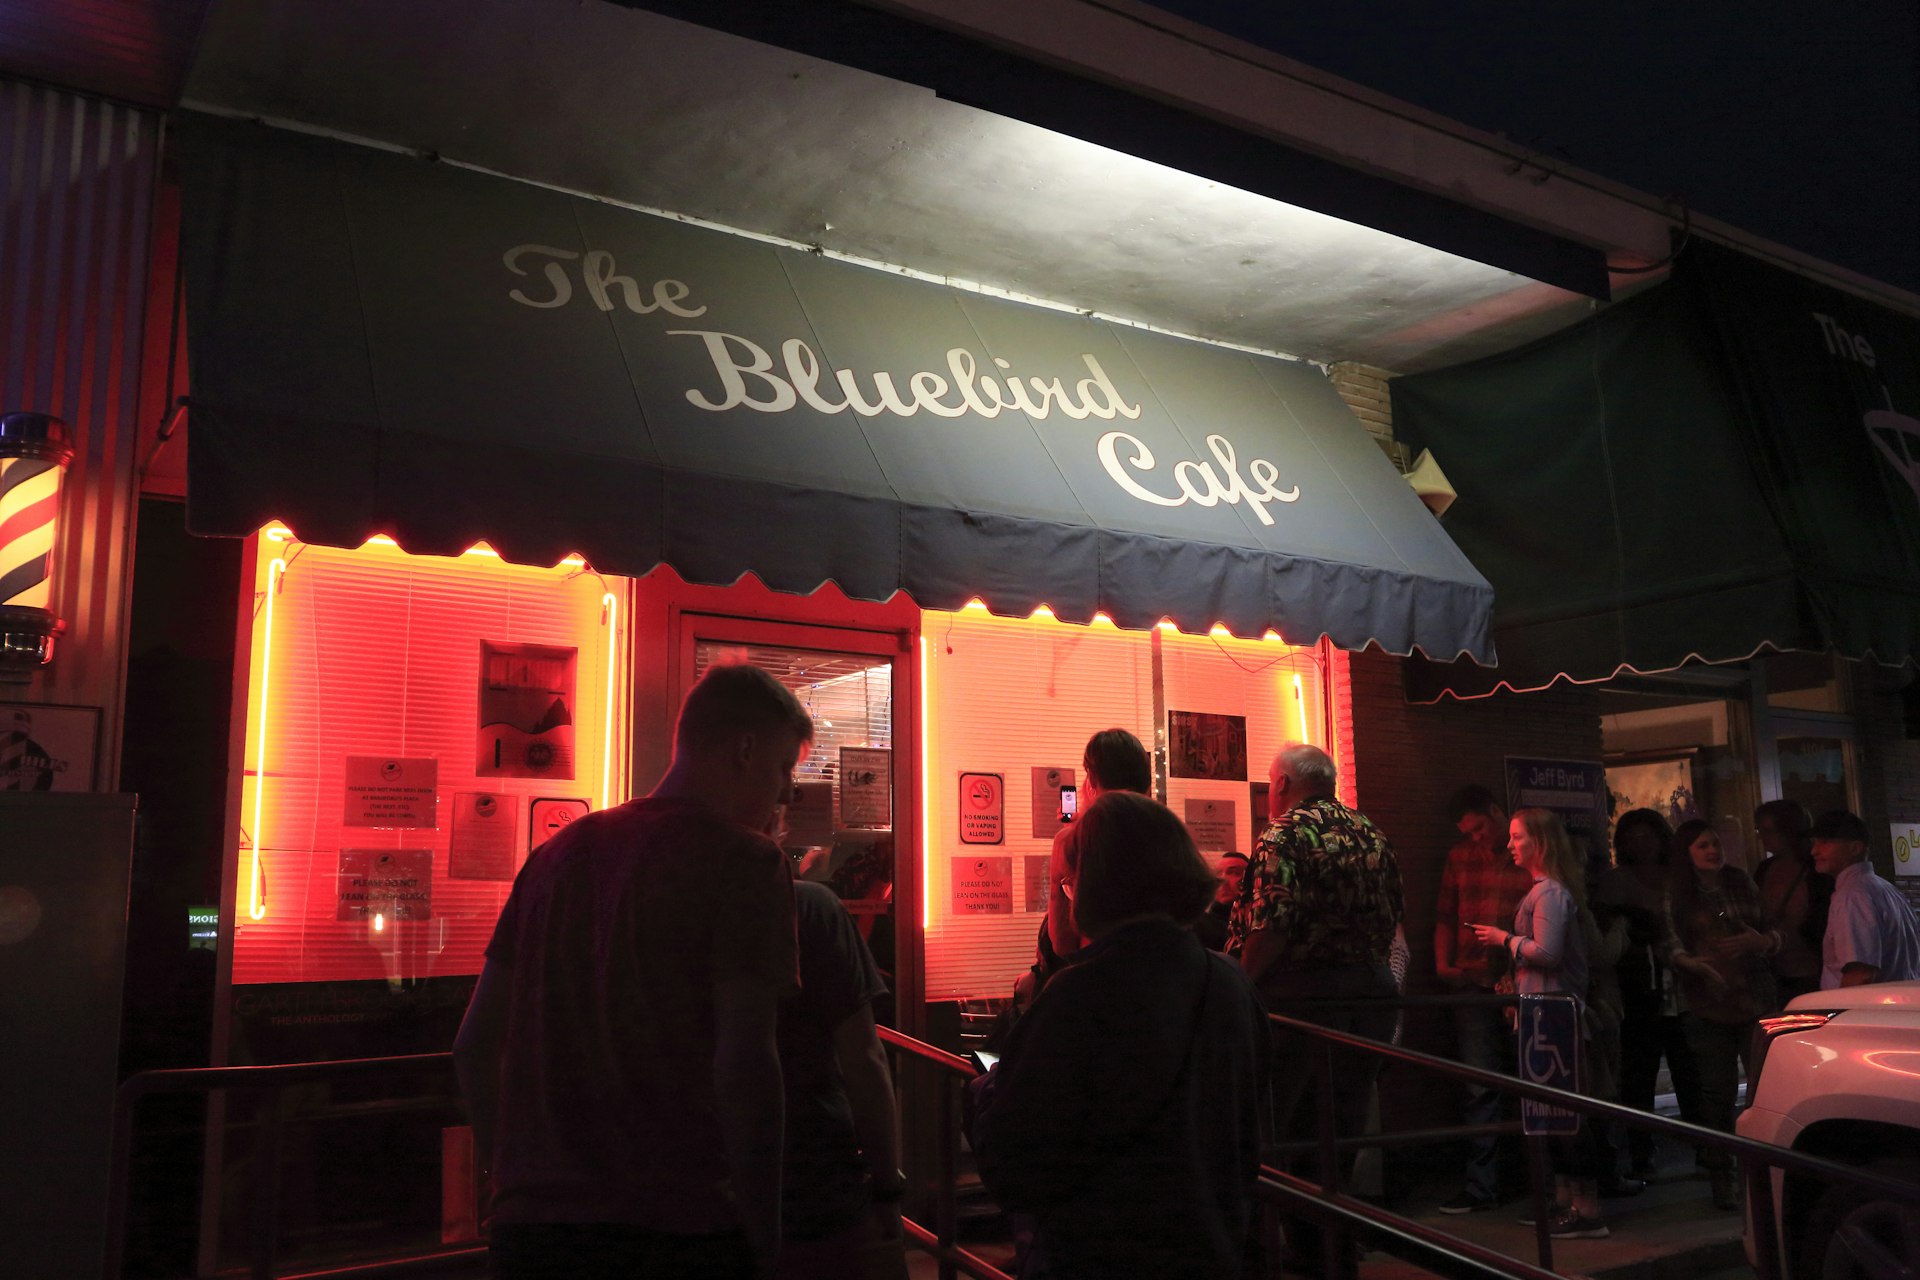 People waiting in line to get into the famous Bluebird Cafe musical club at night